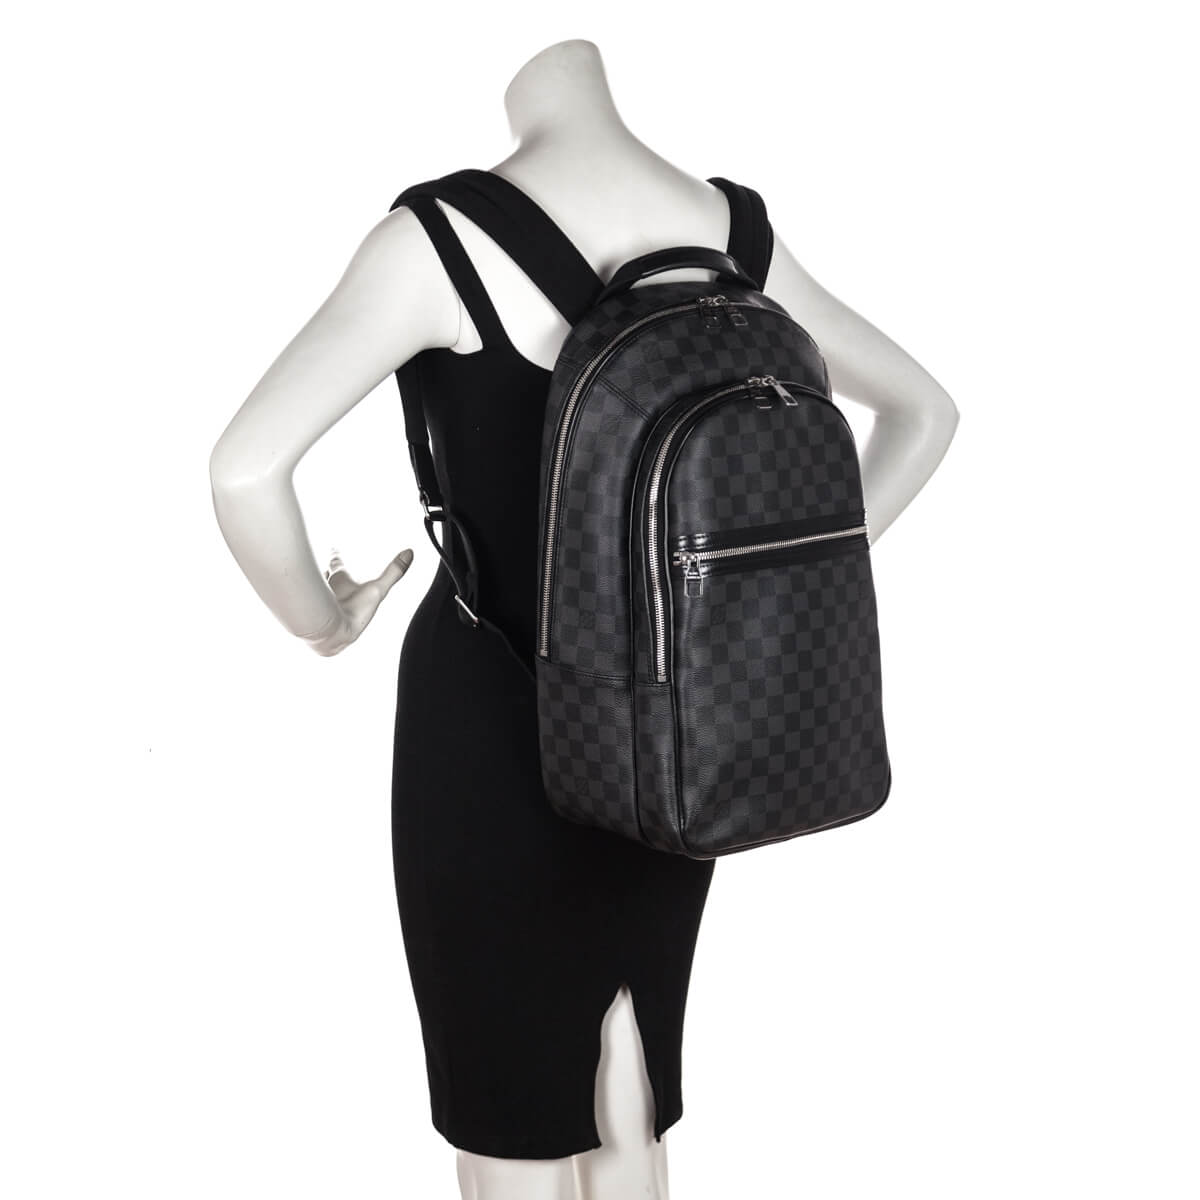 Louis Vuitton Damier Graphite Michael Backpack - Love that Bag etc - Preowned Authentic Designer Handbags & Preloved Fashions